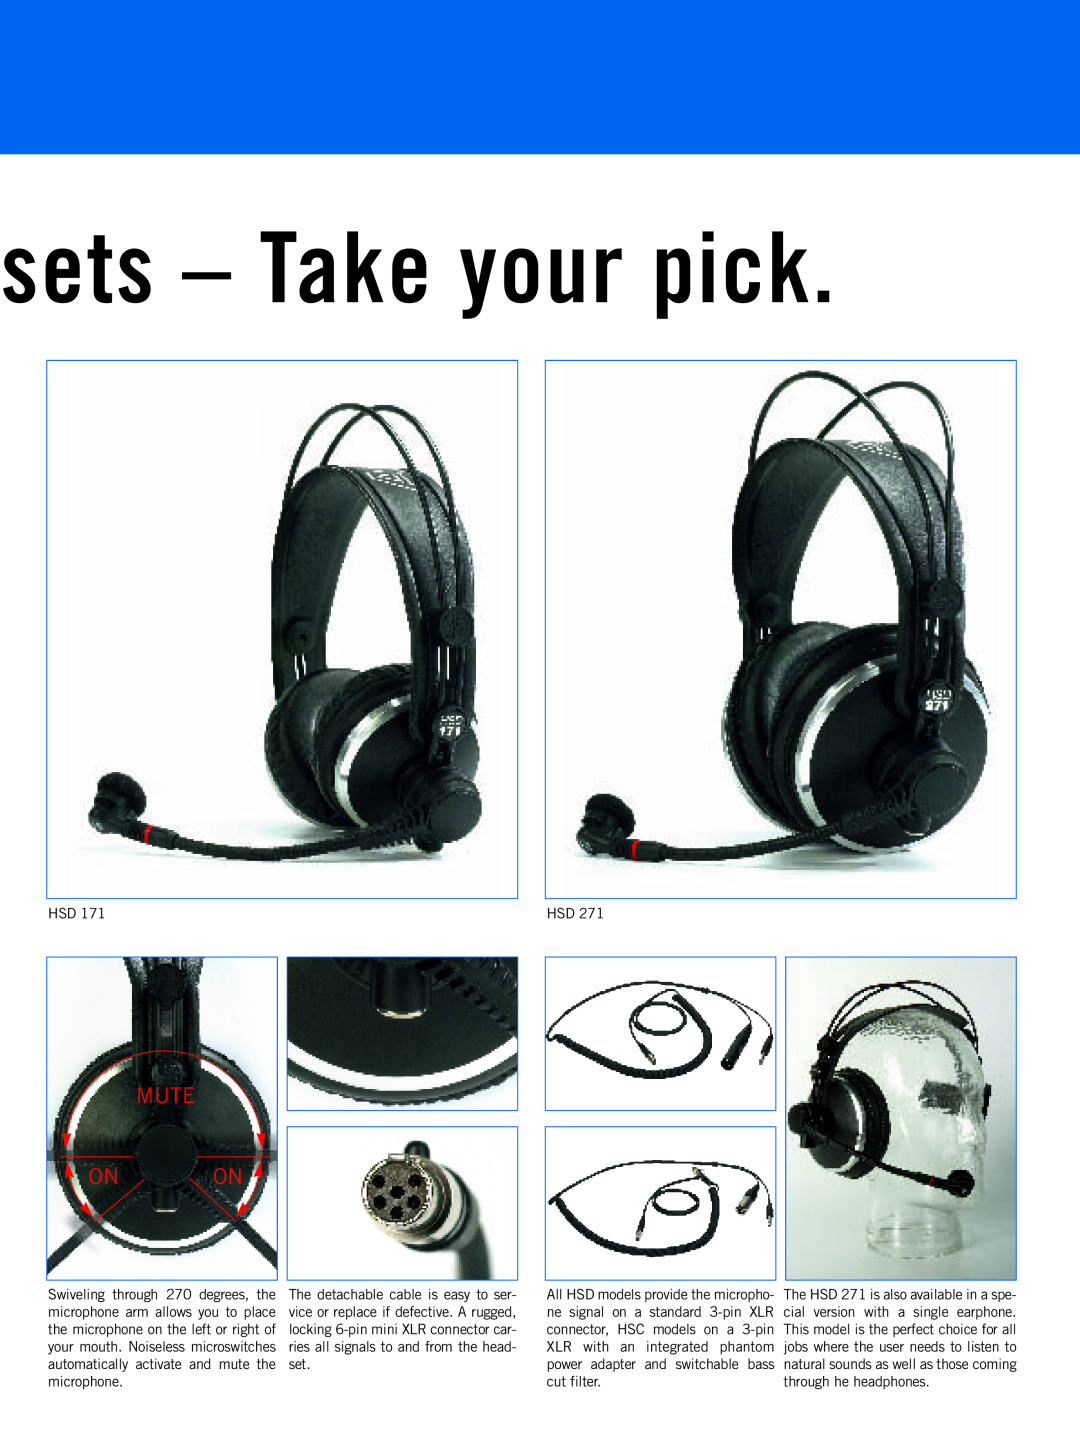 AKG Acoustics HSC Series, HSD Series manual sets - Take your pick, Mute On On 